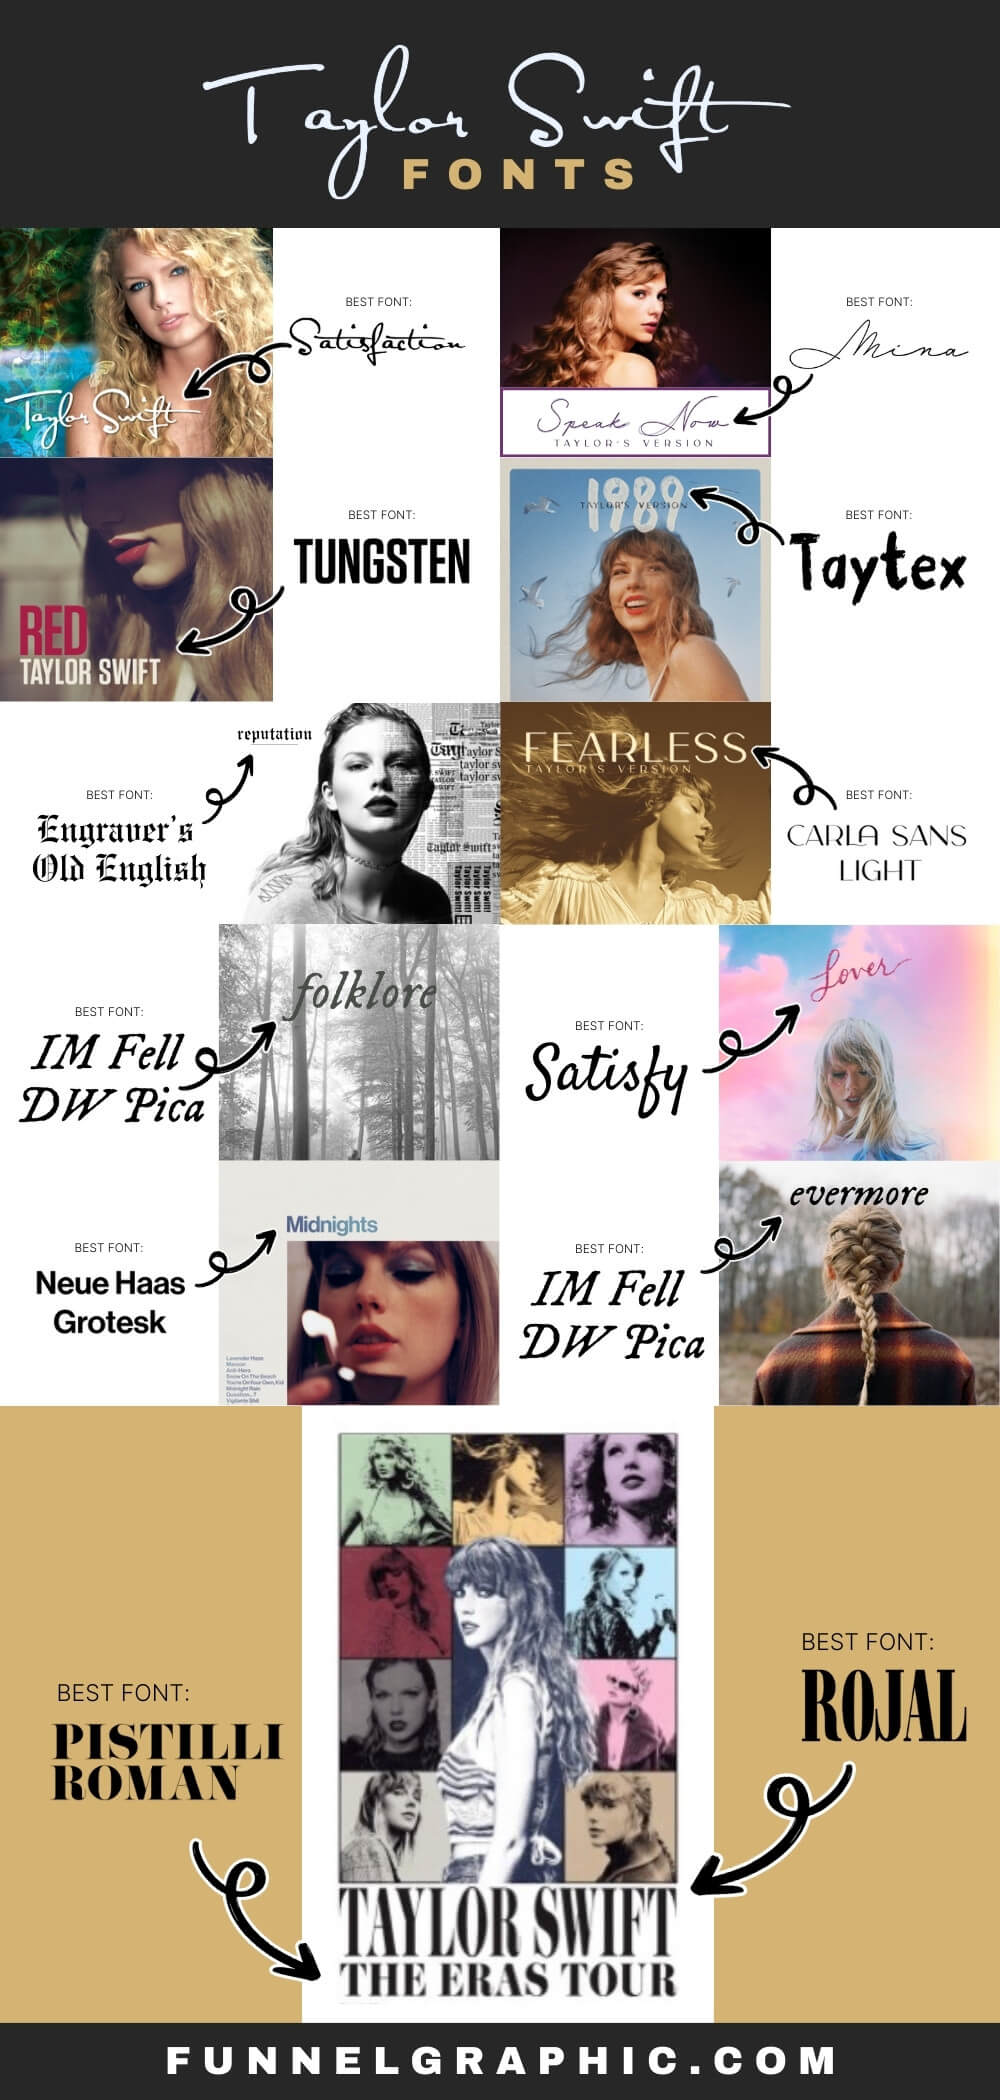 Taylor Swift Fonts Funnel Graphic Pins 1000 x 2100 px